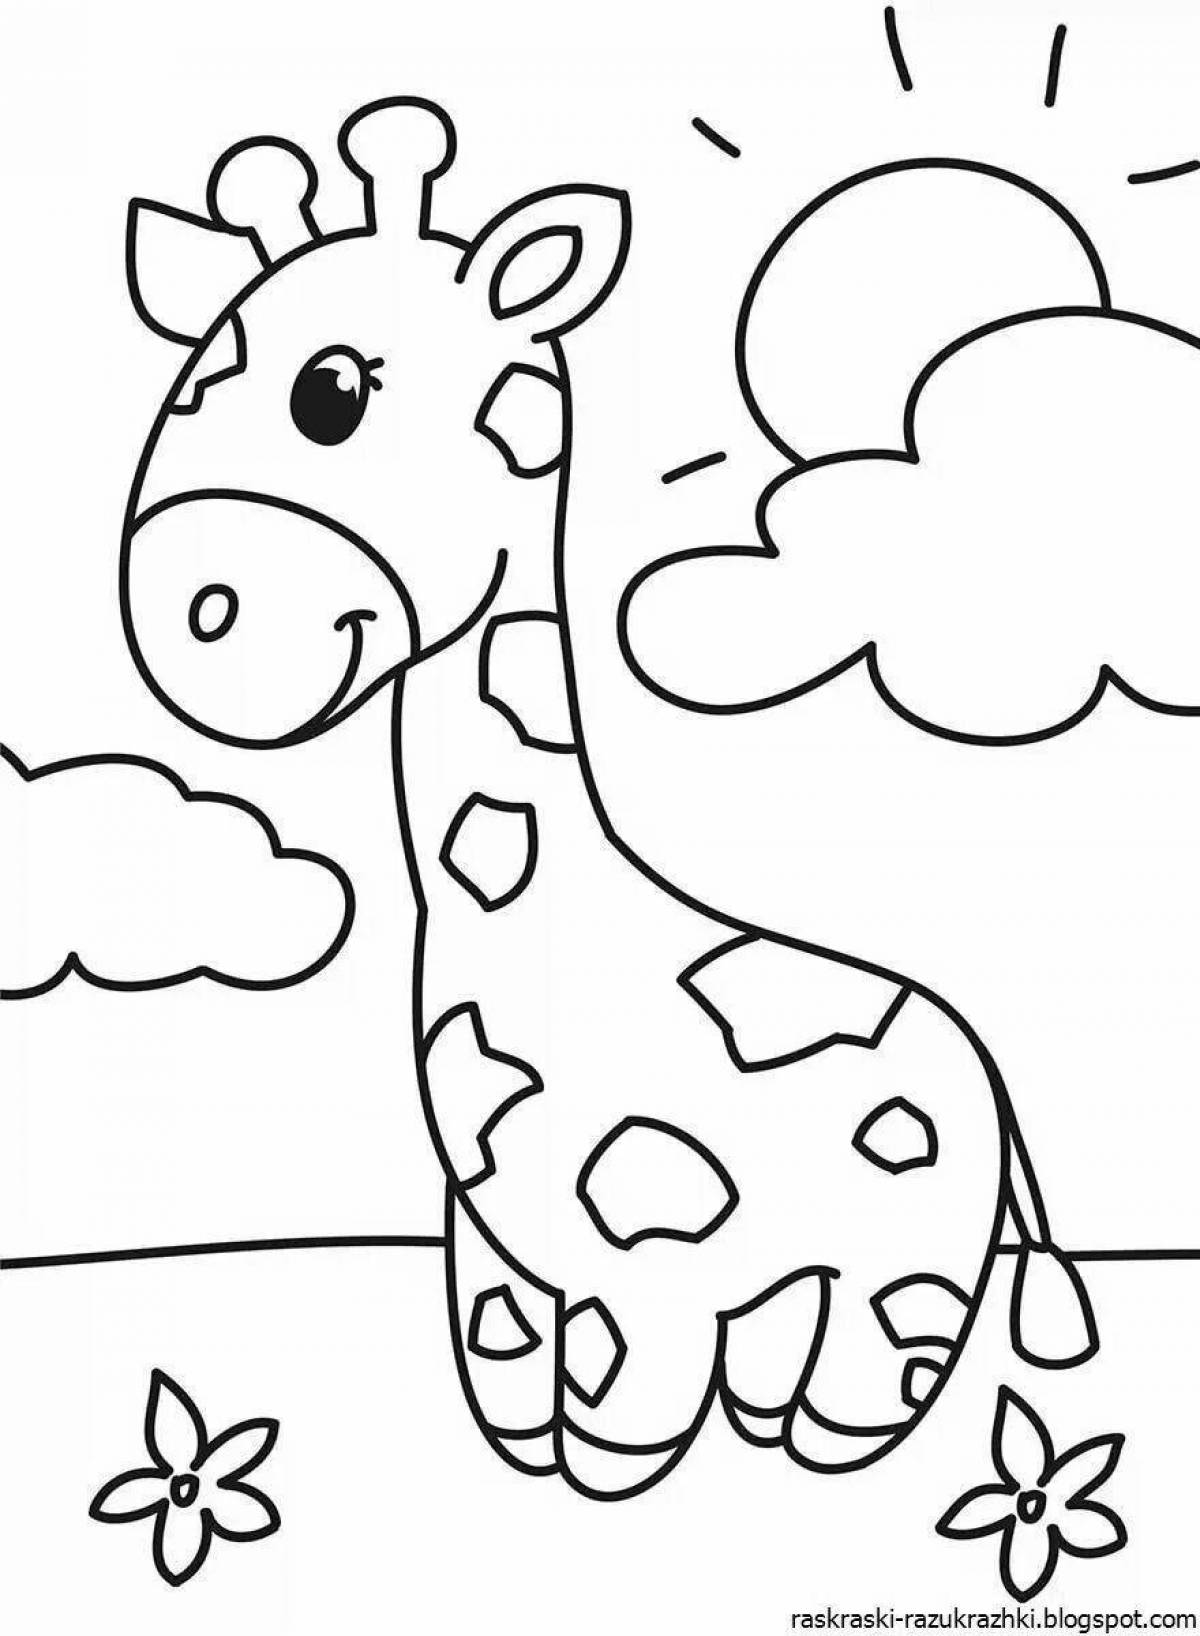 Dazzling coloring book for 3-4 year olds